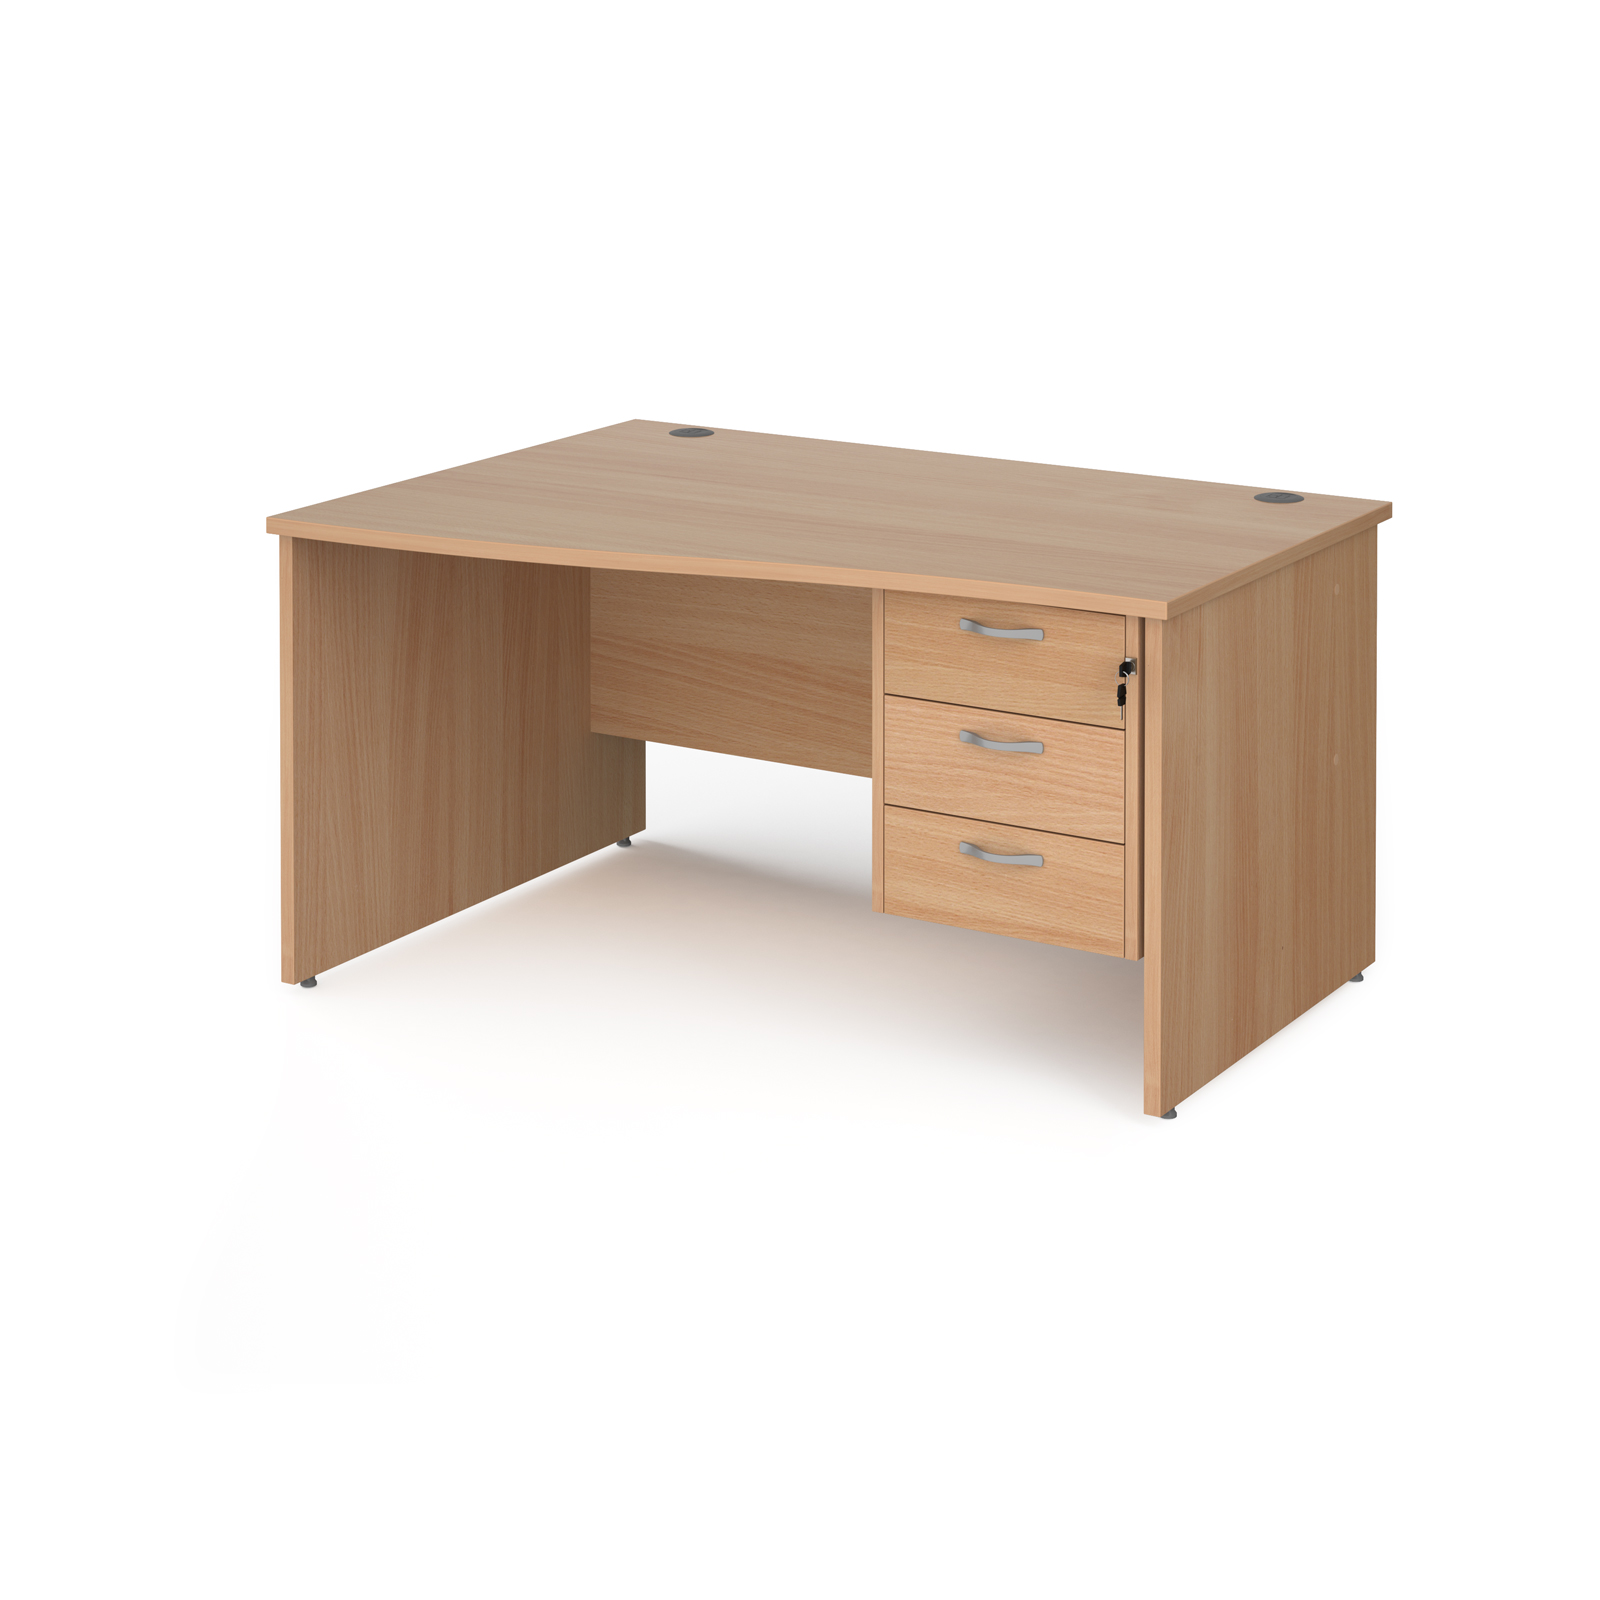 Maestro 25 left hand wave desk 1400mm wide with 3 drawer pedestal - beech top with panel end leg